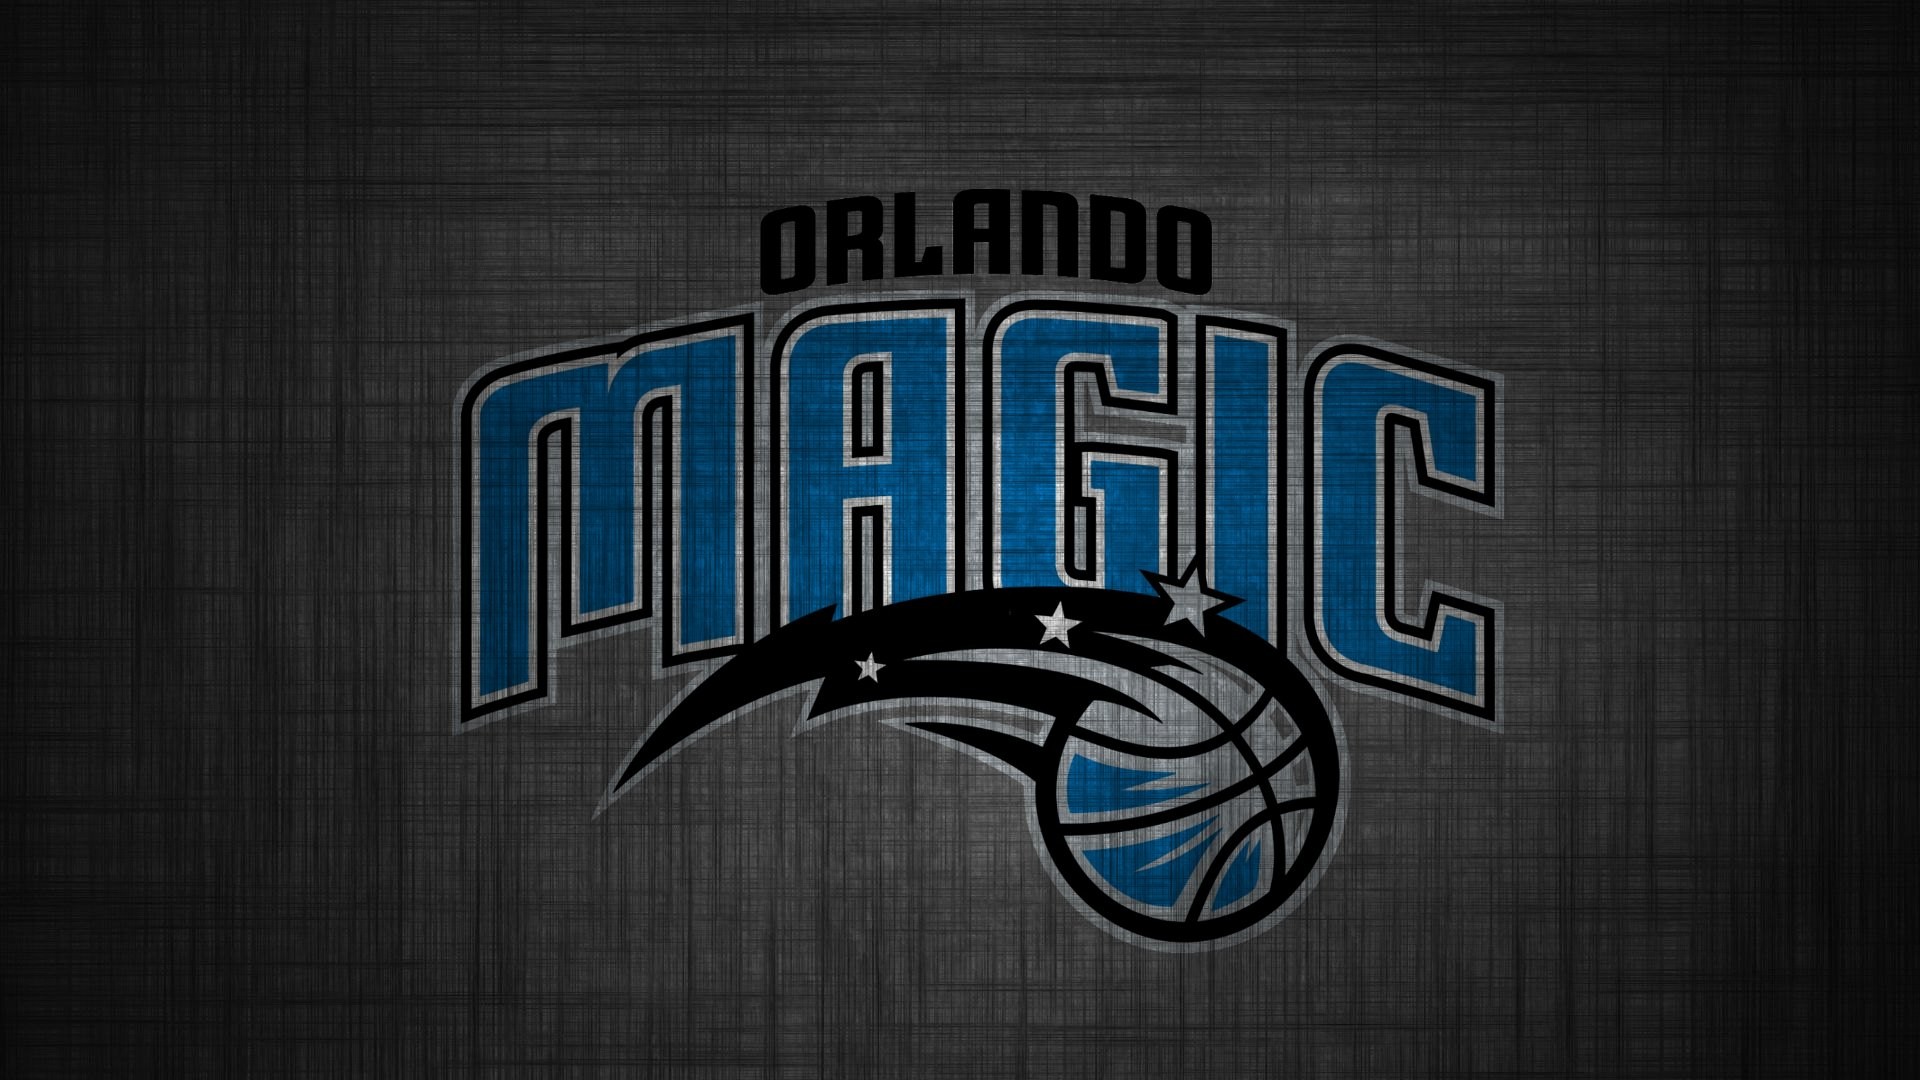 Wallpapers HD Orlando Magic NBA with high-resolution 1920x1080 pixel. You can use this wallpaper for your Desktop Computer Backgrounds, Windows or Mac Screensavers, iPhone Lock screen, Tablet or Android and another Mobile Phone device